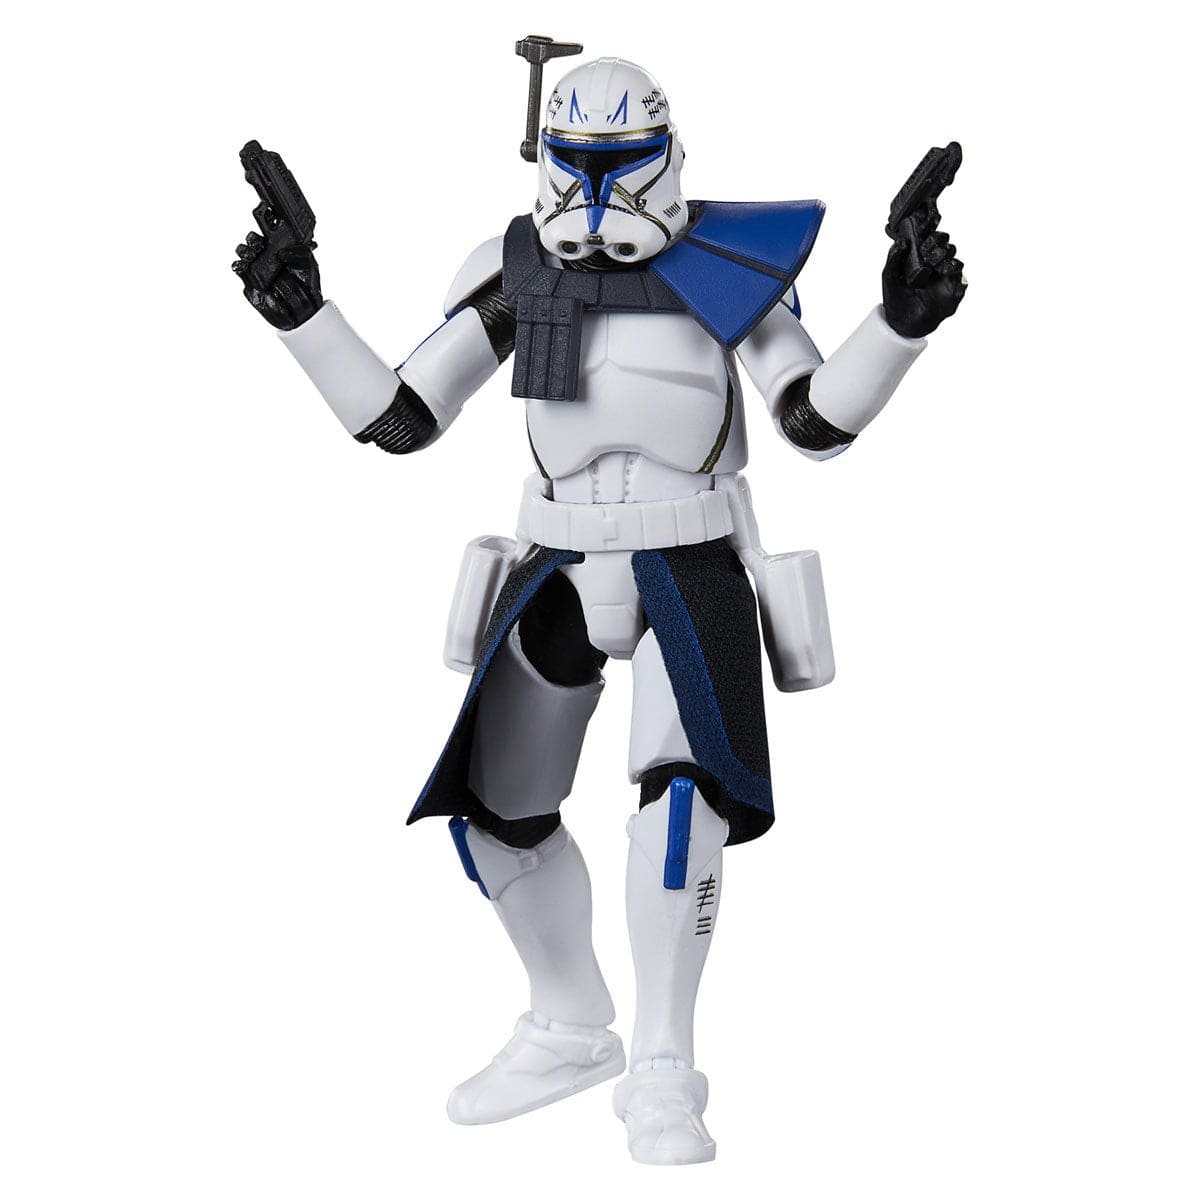 Star Wars The Vintage Collection Captain Rex (Bracca Mission) 3 3/4-Inch Action Figure